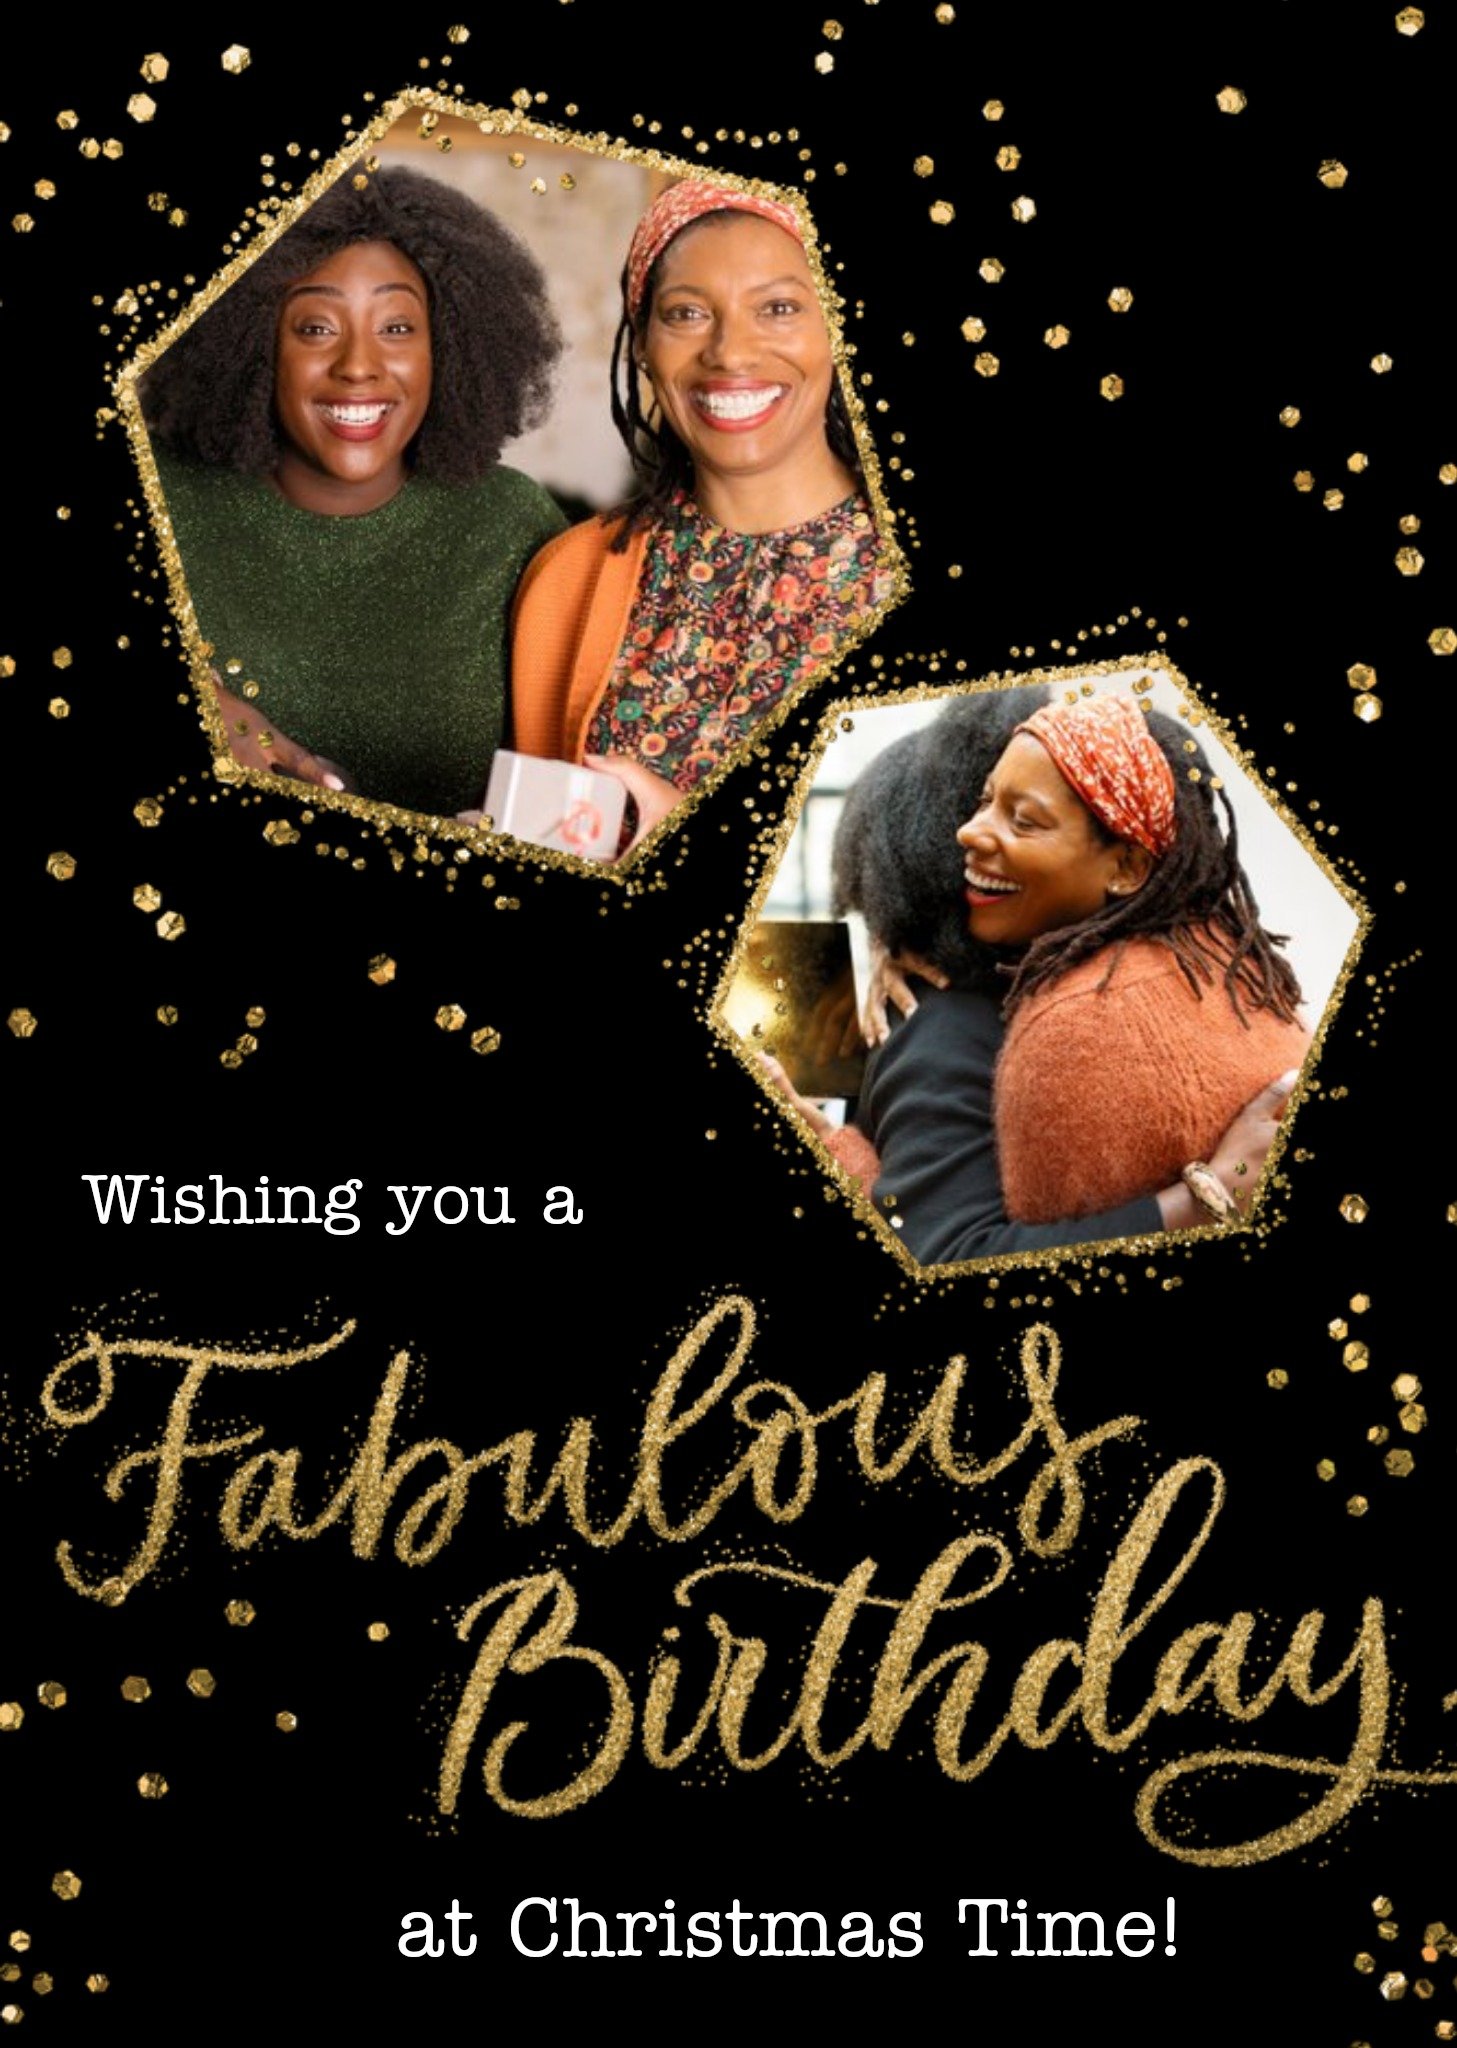 Moonpig Metallic Gold Lettering Fabulous Birthday At Time Photo Upload Card Ecard